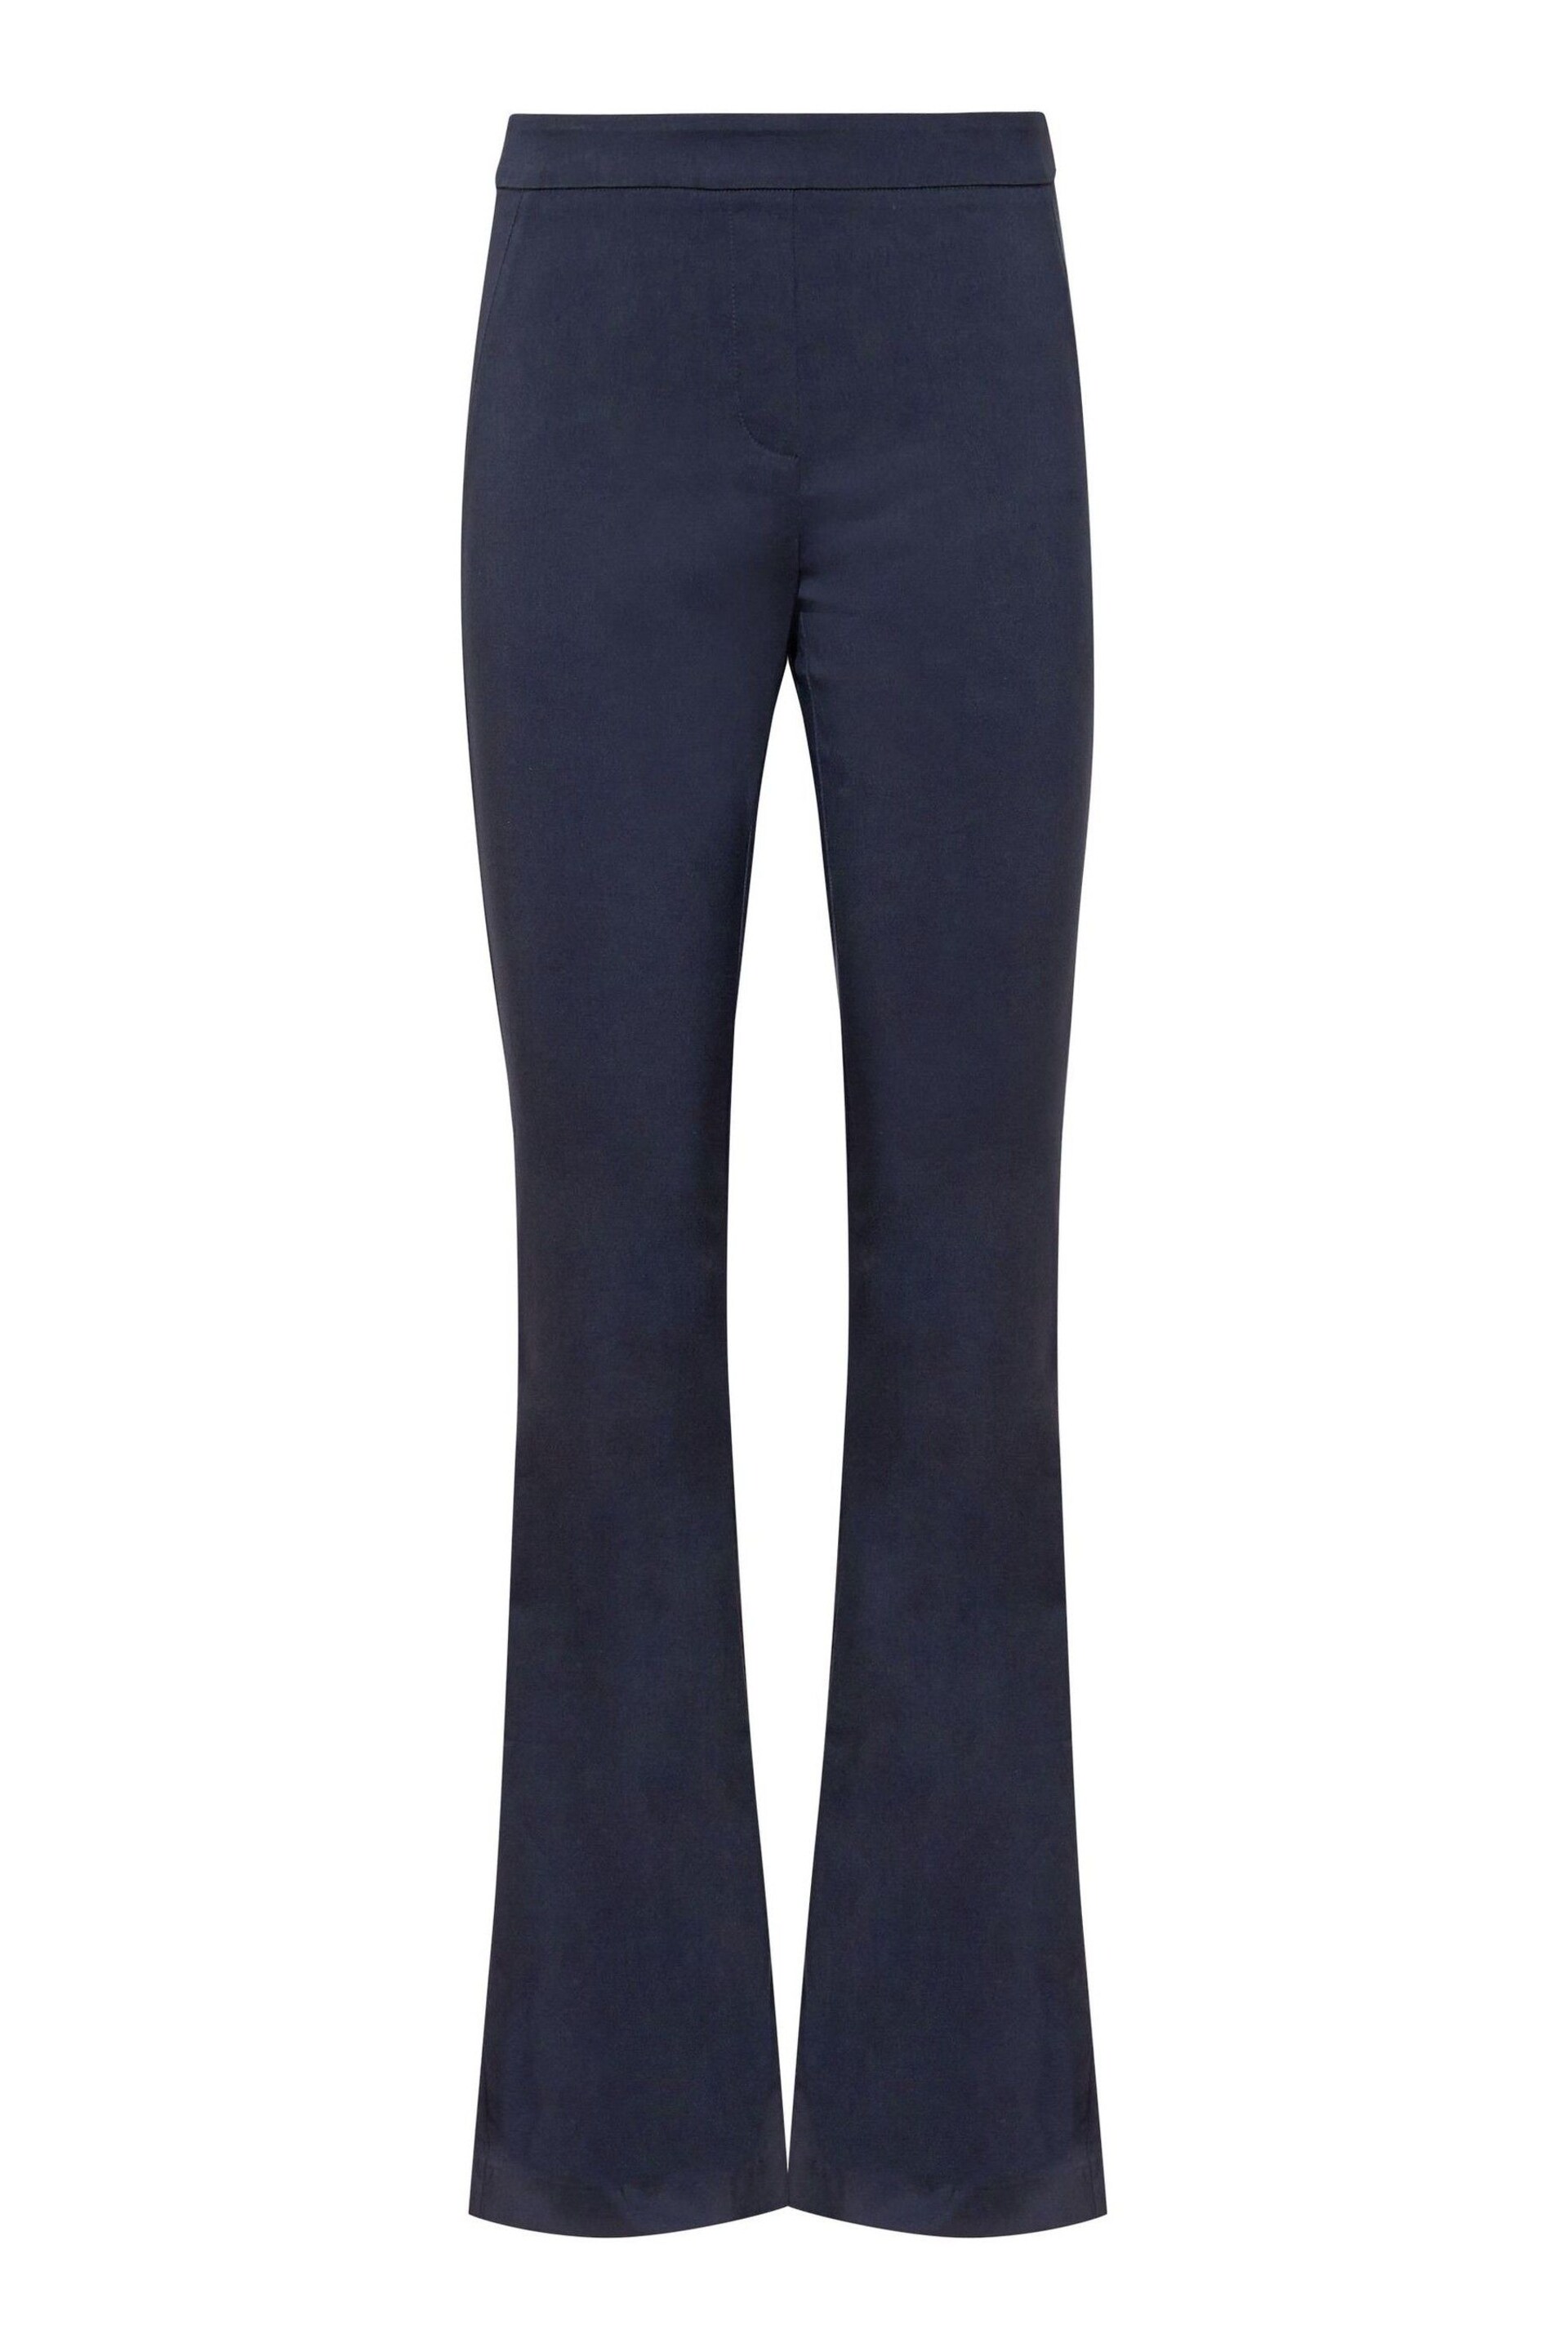 Long Tall Sally Blue Bi-Stretch Bootcut Trousers - Image 3 of 3